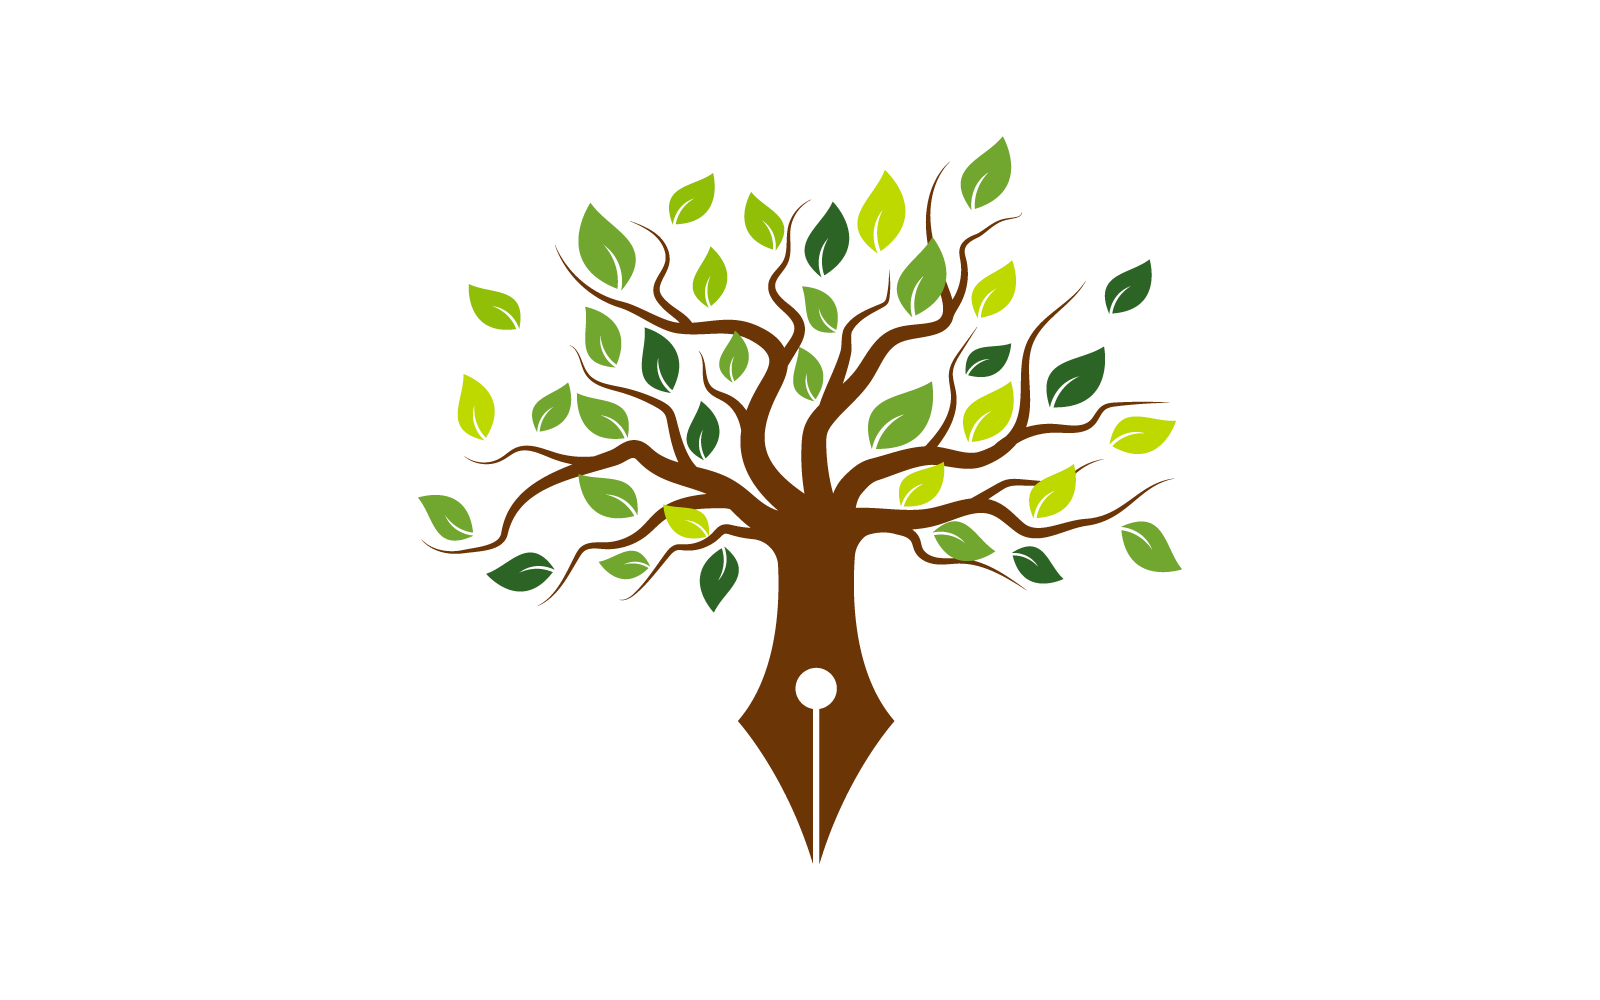 Logo Of Tree with pencil illustration vector flat design